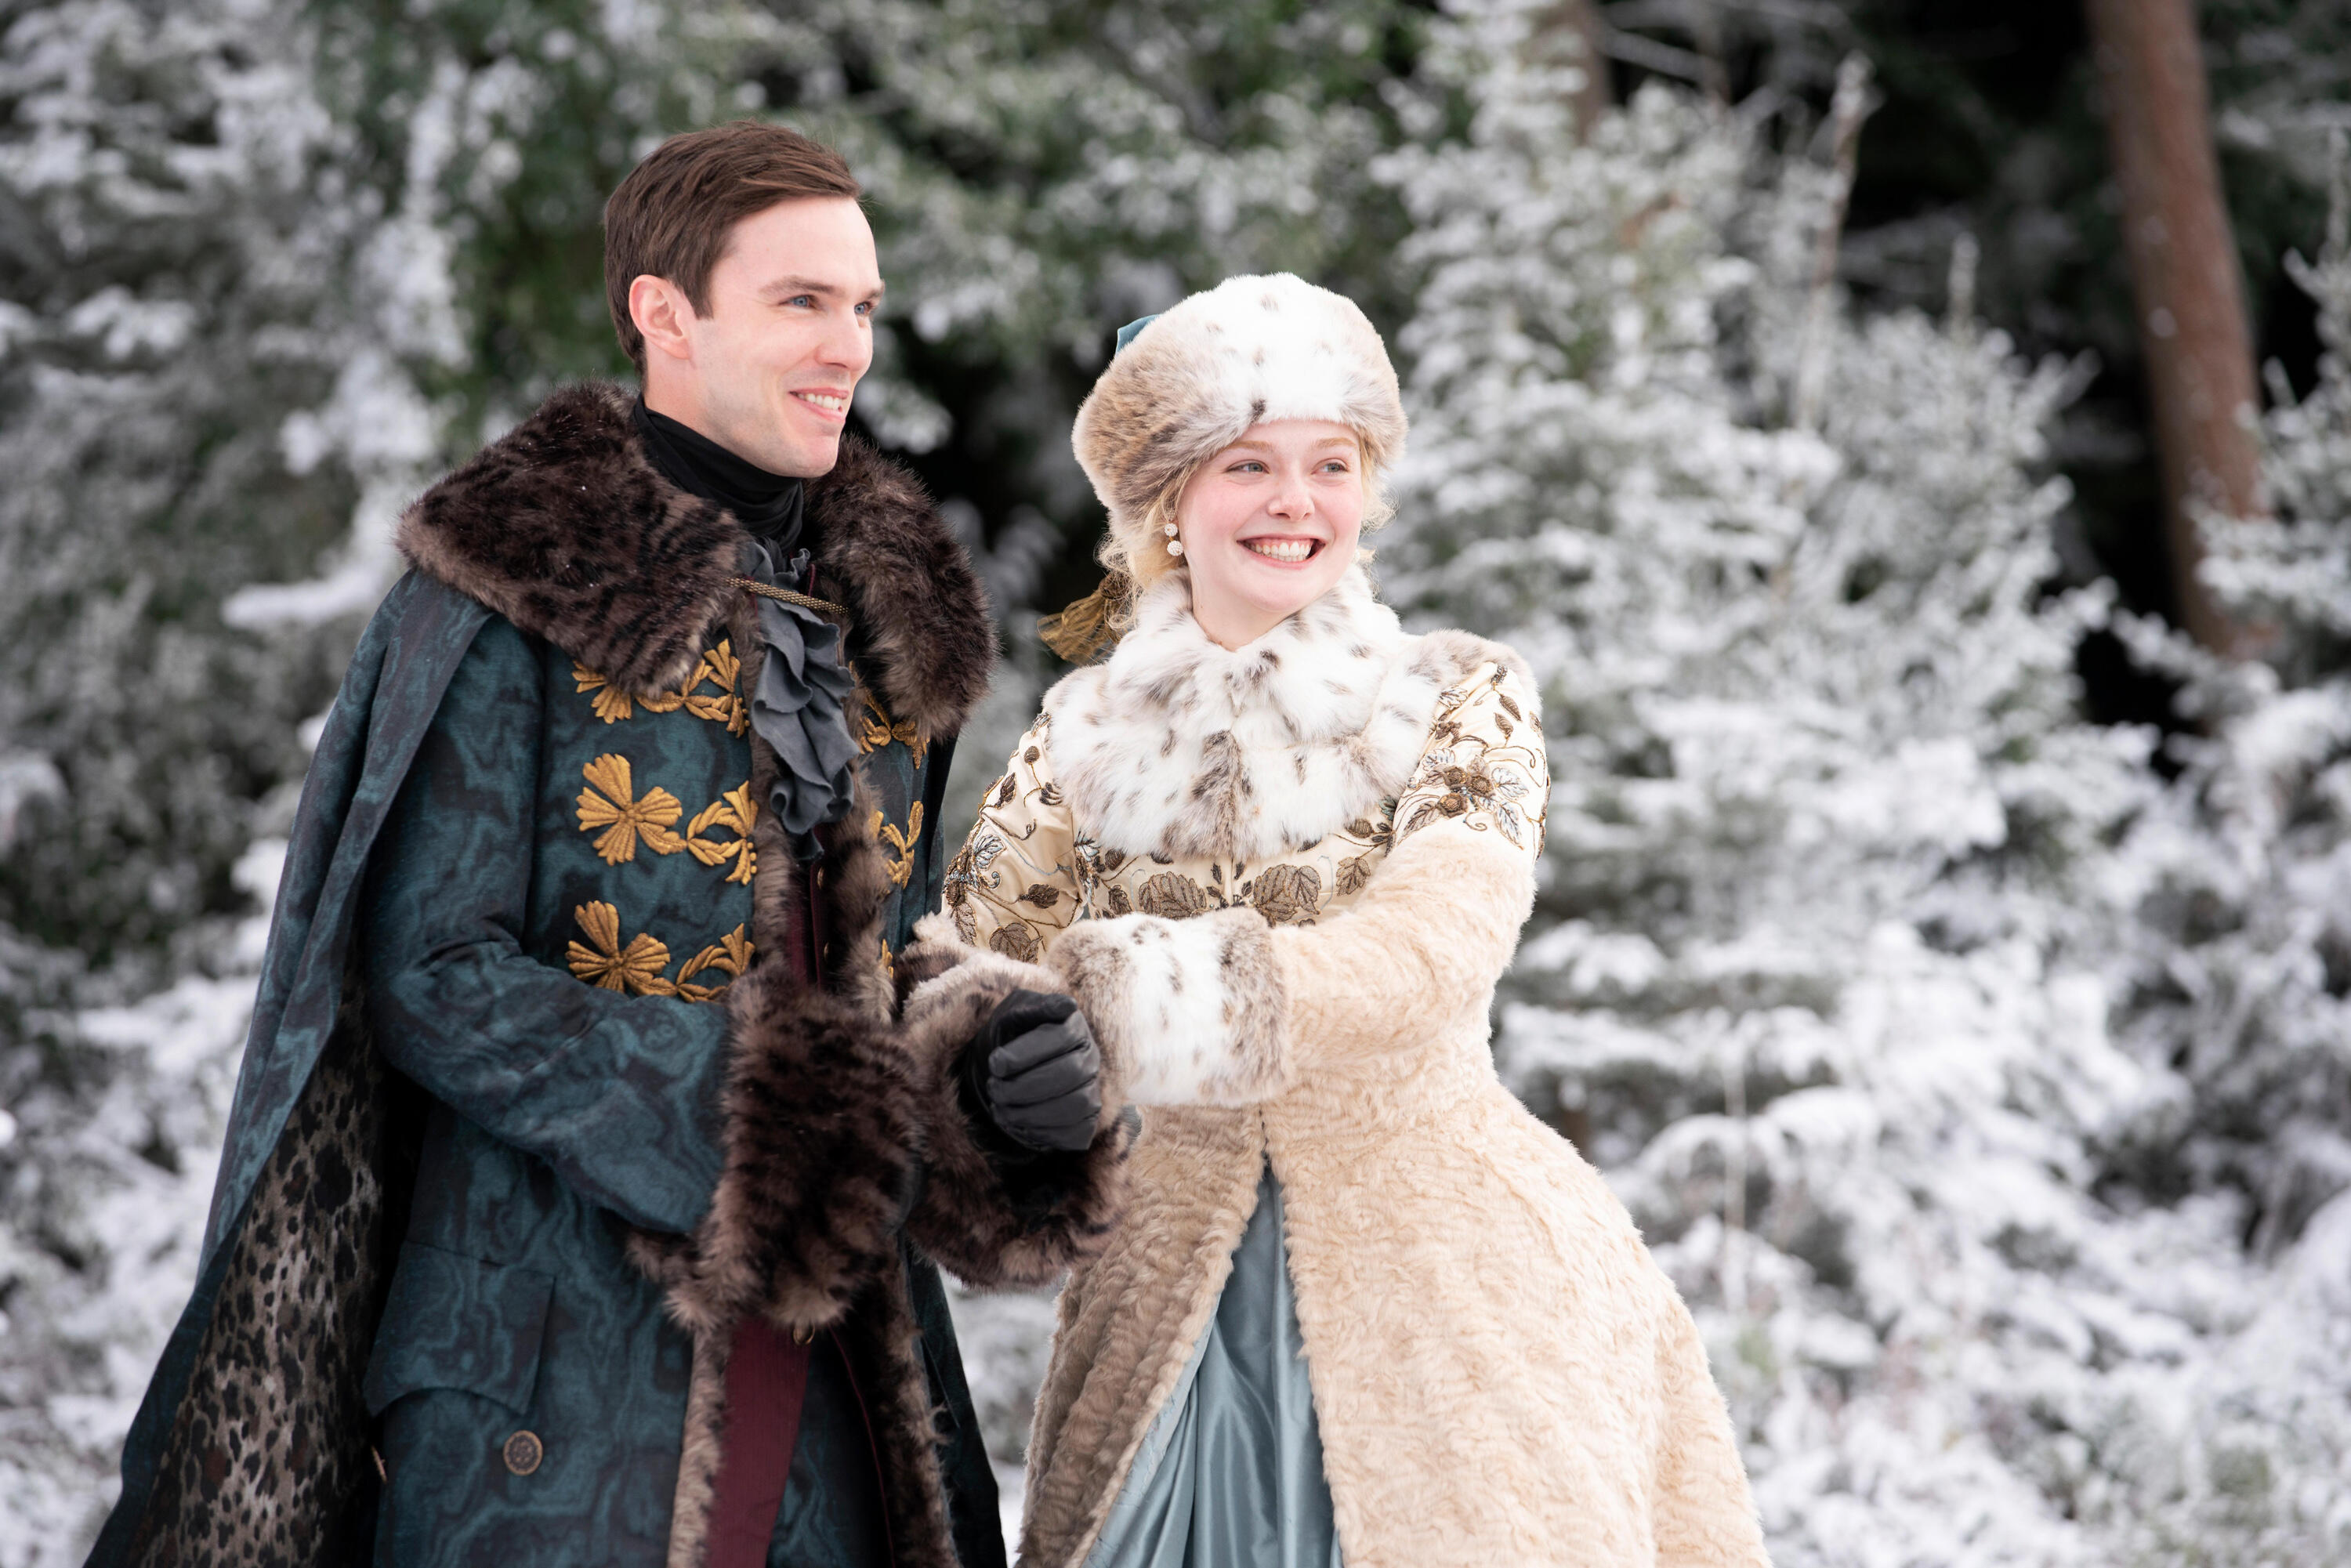  Elle Manning and Nicholas Hoult in "The Great" Season 3